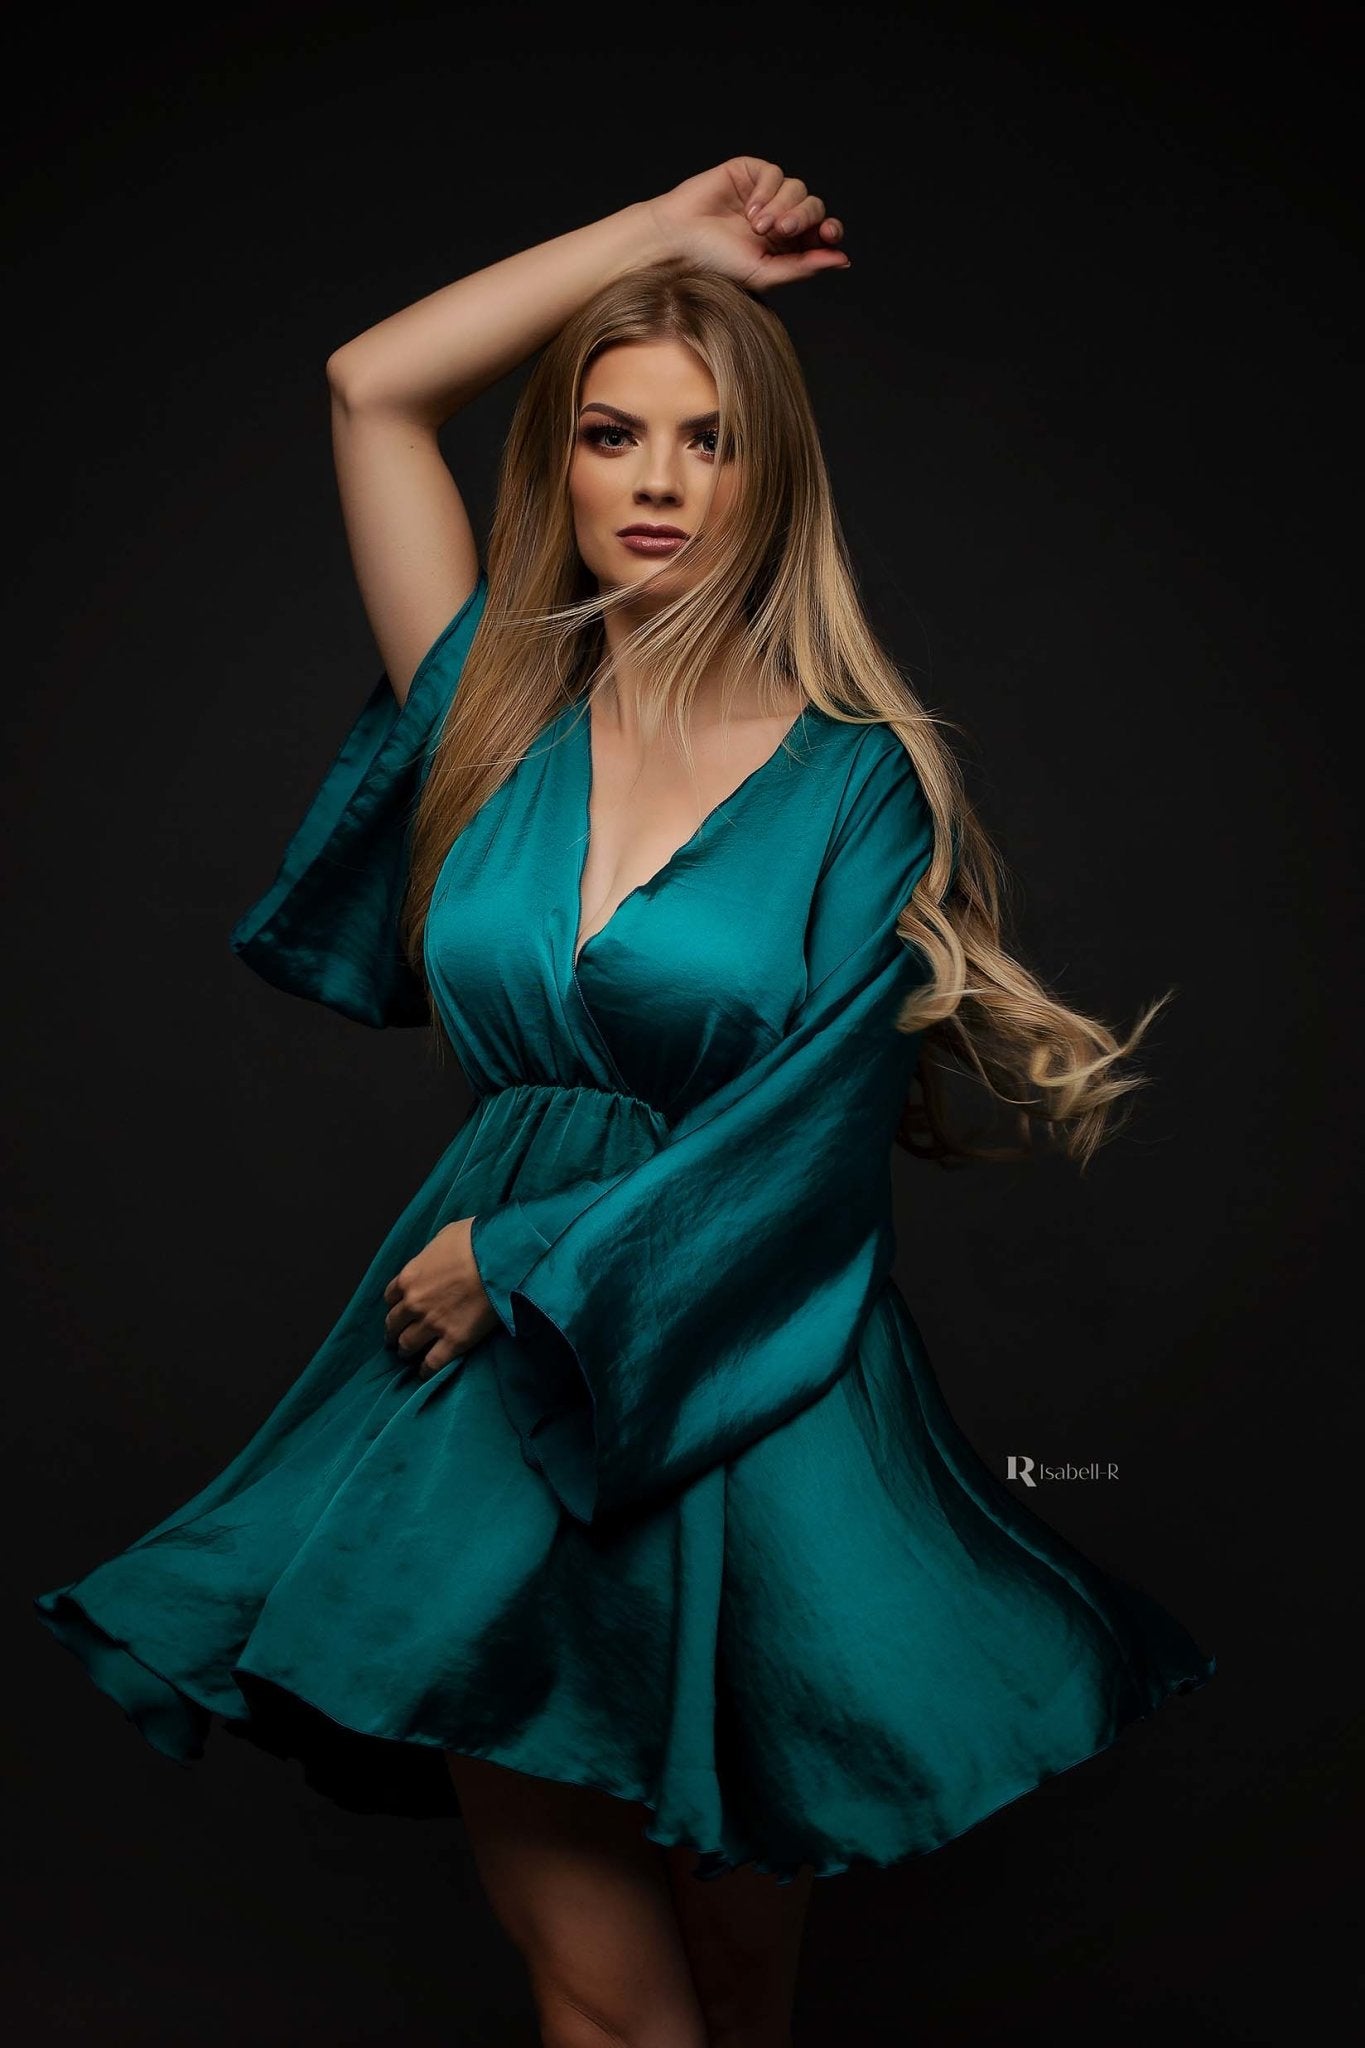 blond model poses wearing a short silky dress in emerald color. the dress has kaftan style sleeves and a low v cut neckline.